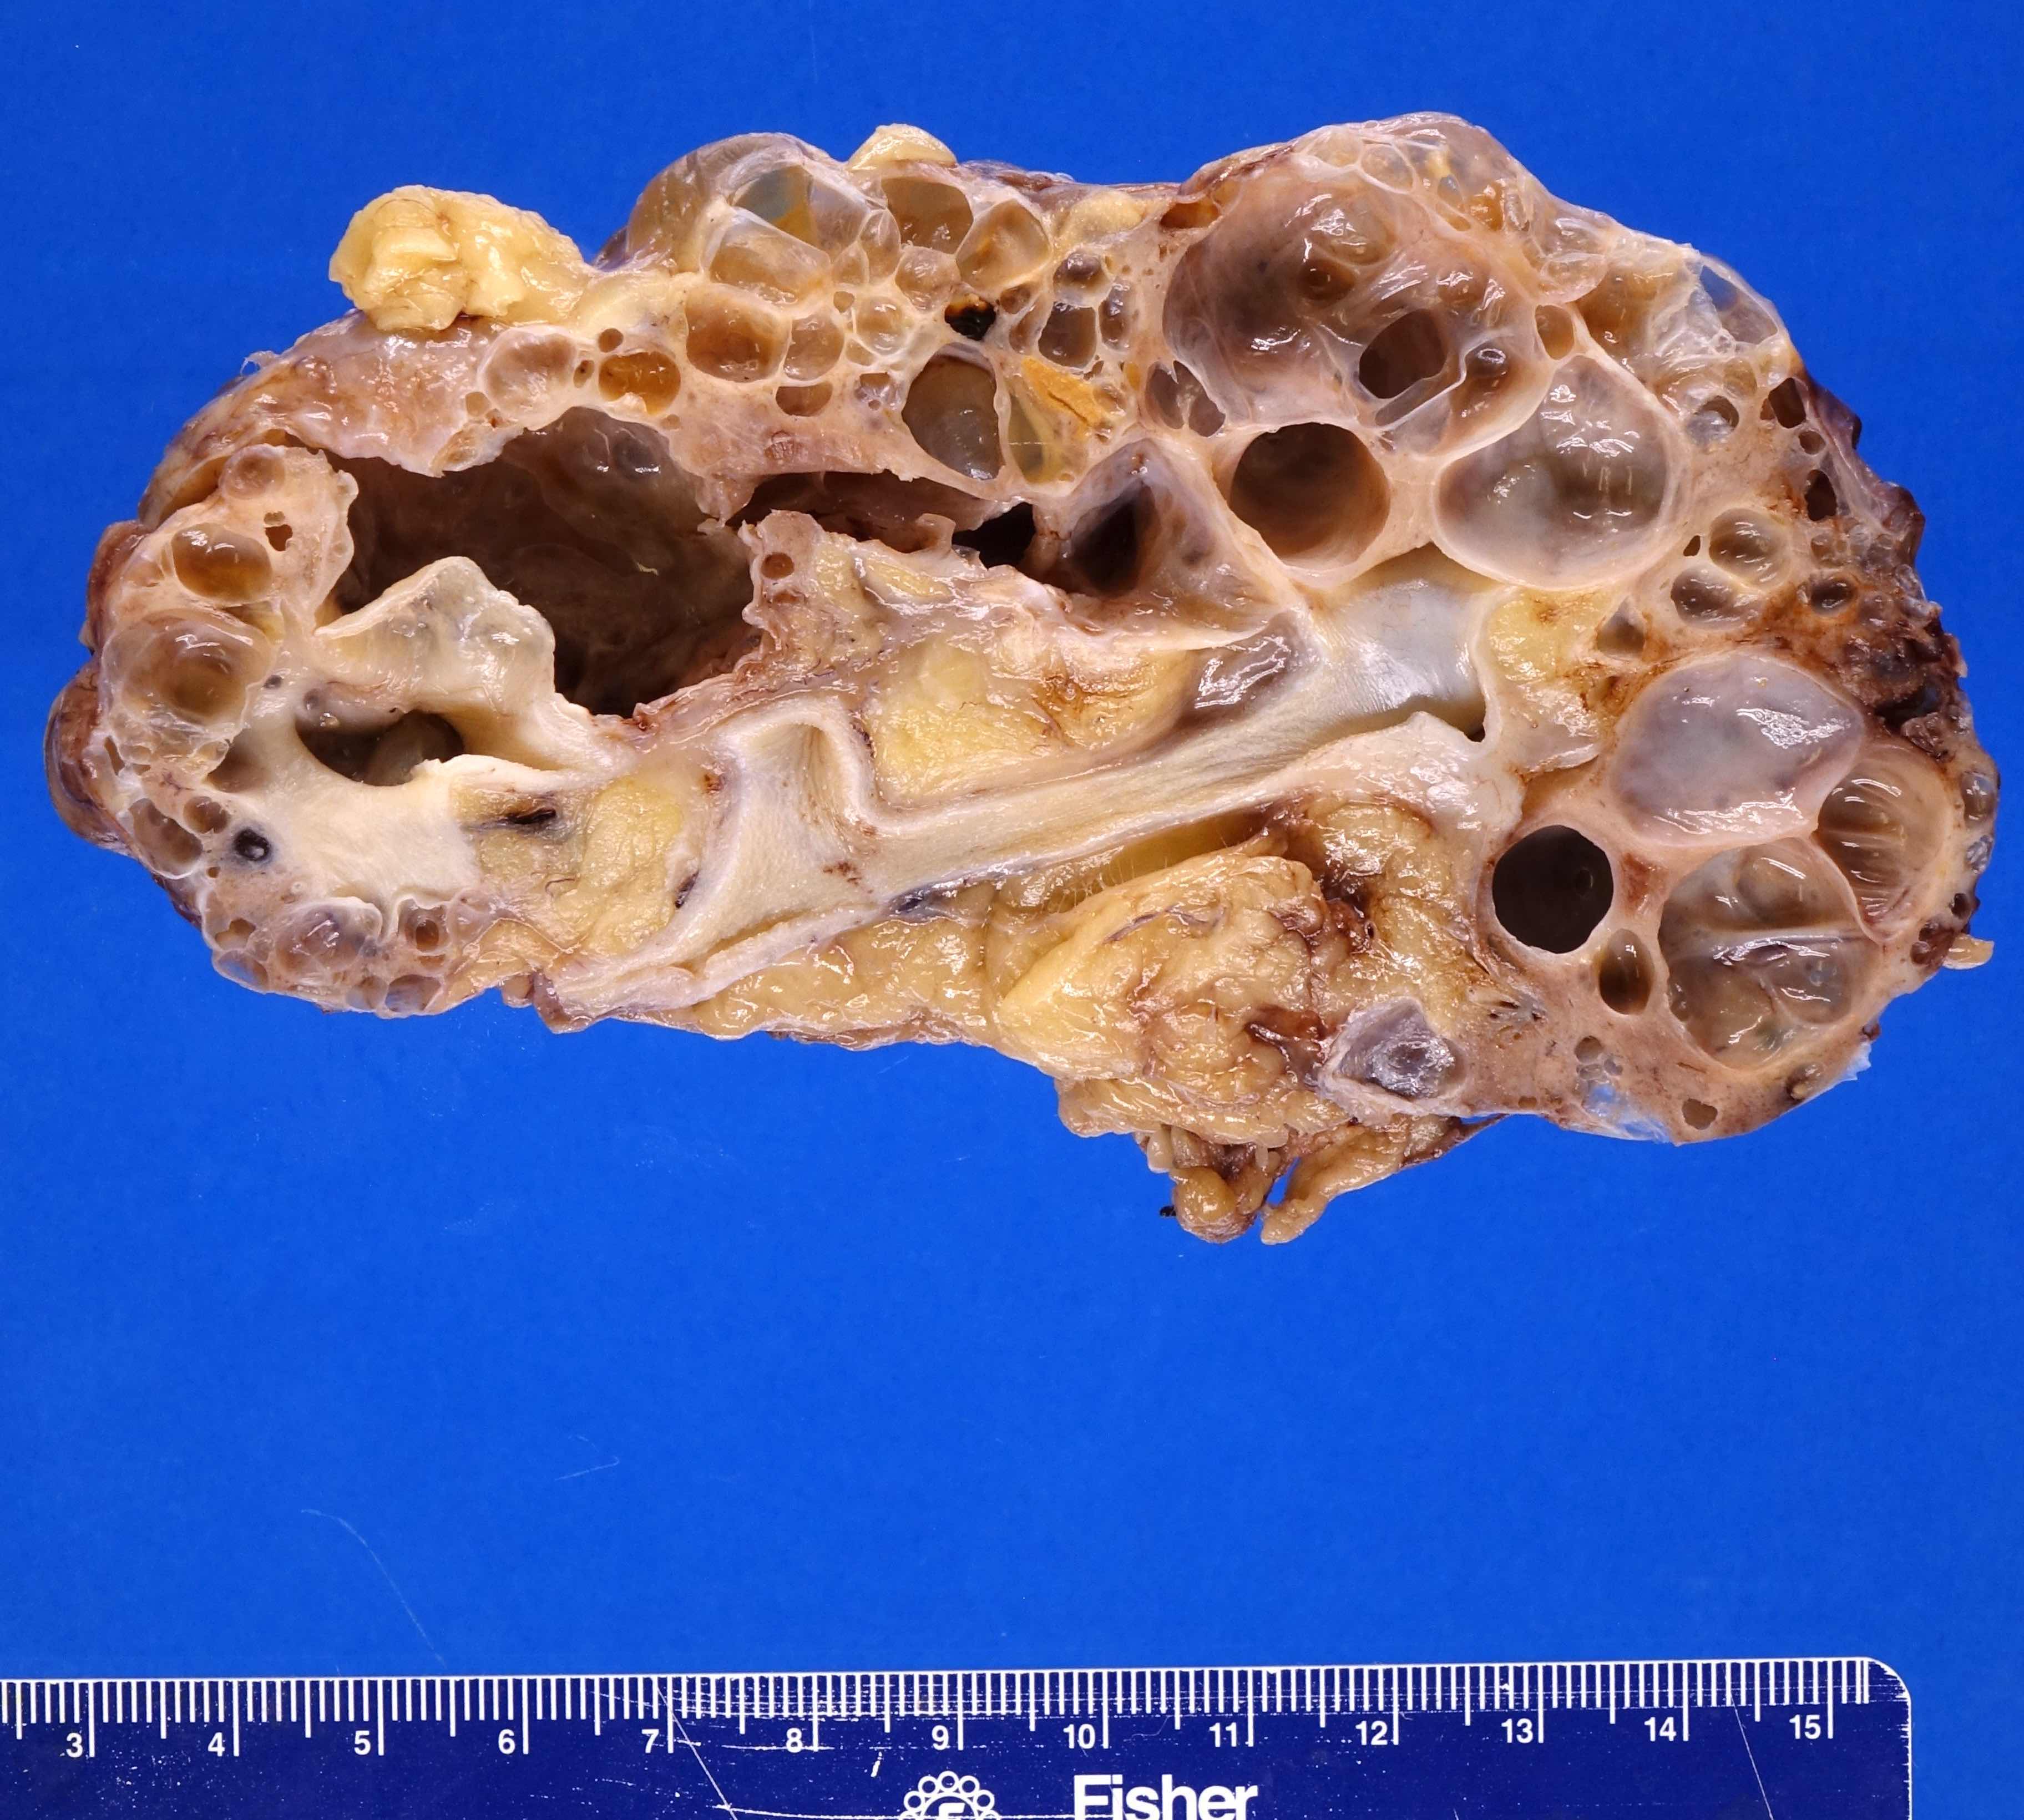 Numerous cysts of varying sizes